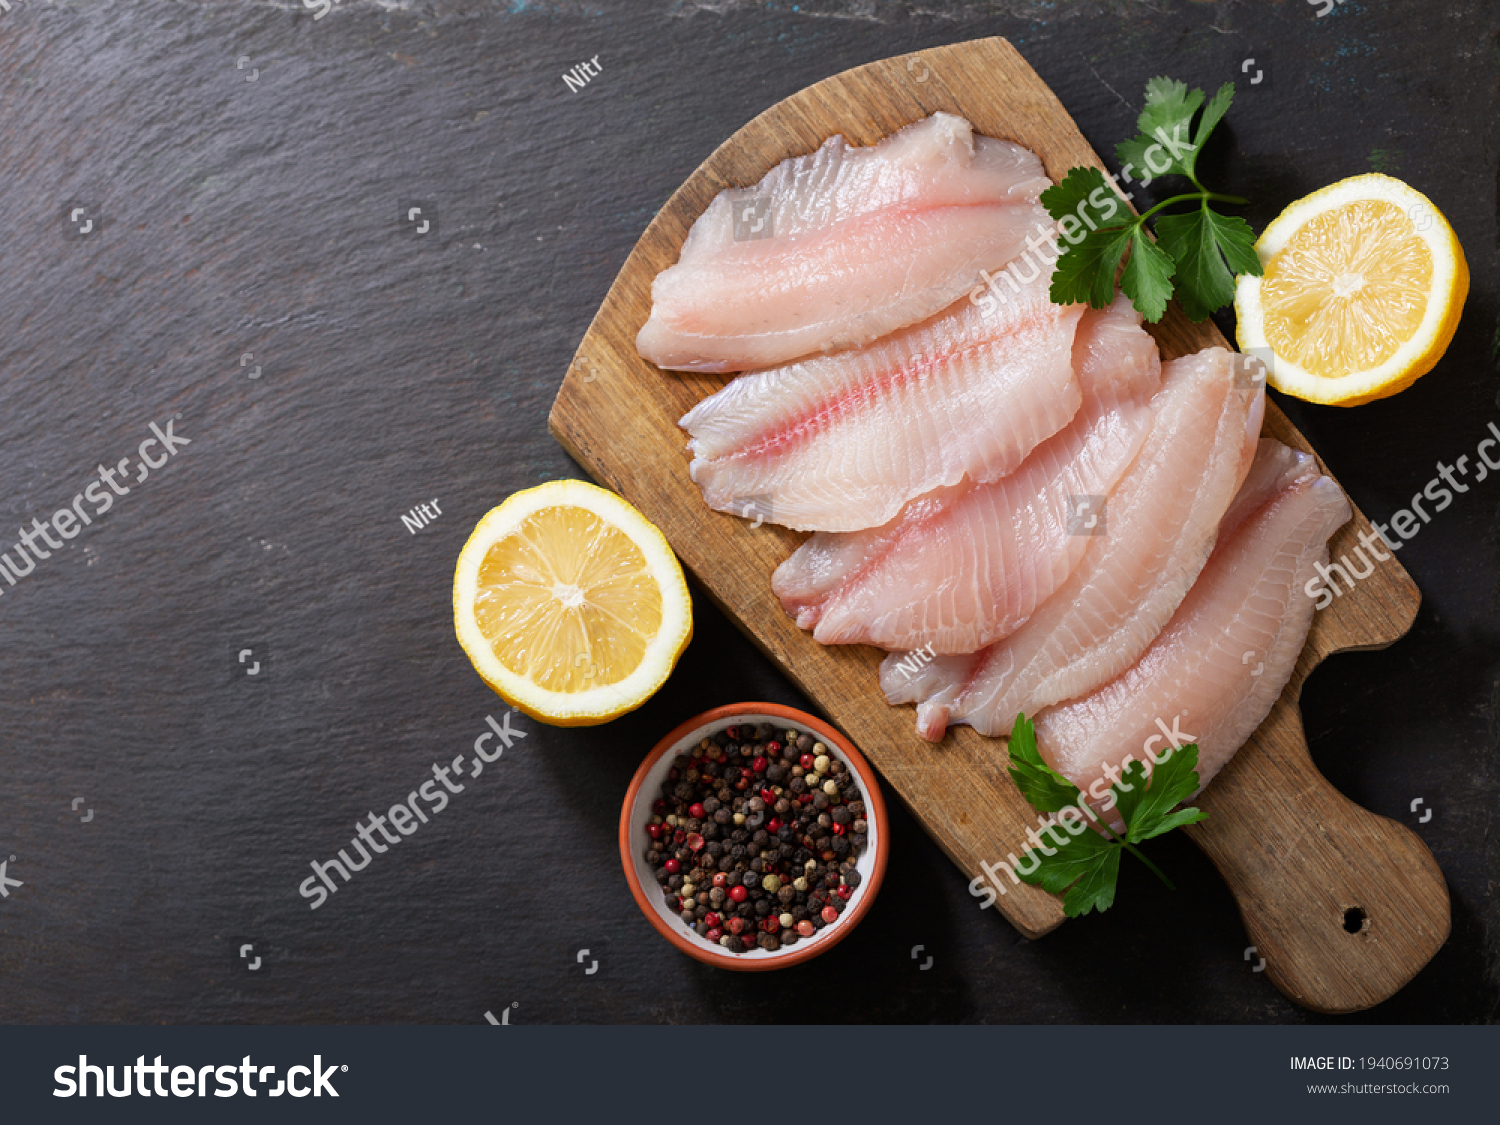 fresh fish fillet of tilapia with ingredients for cooking on wooden board, top view #1940691073